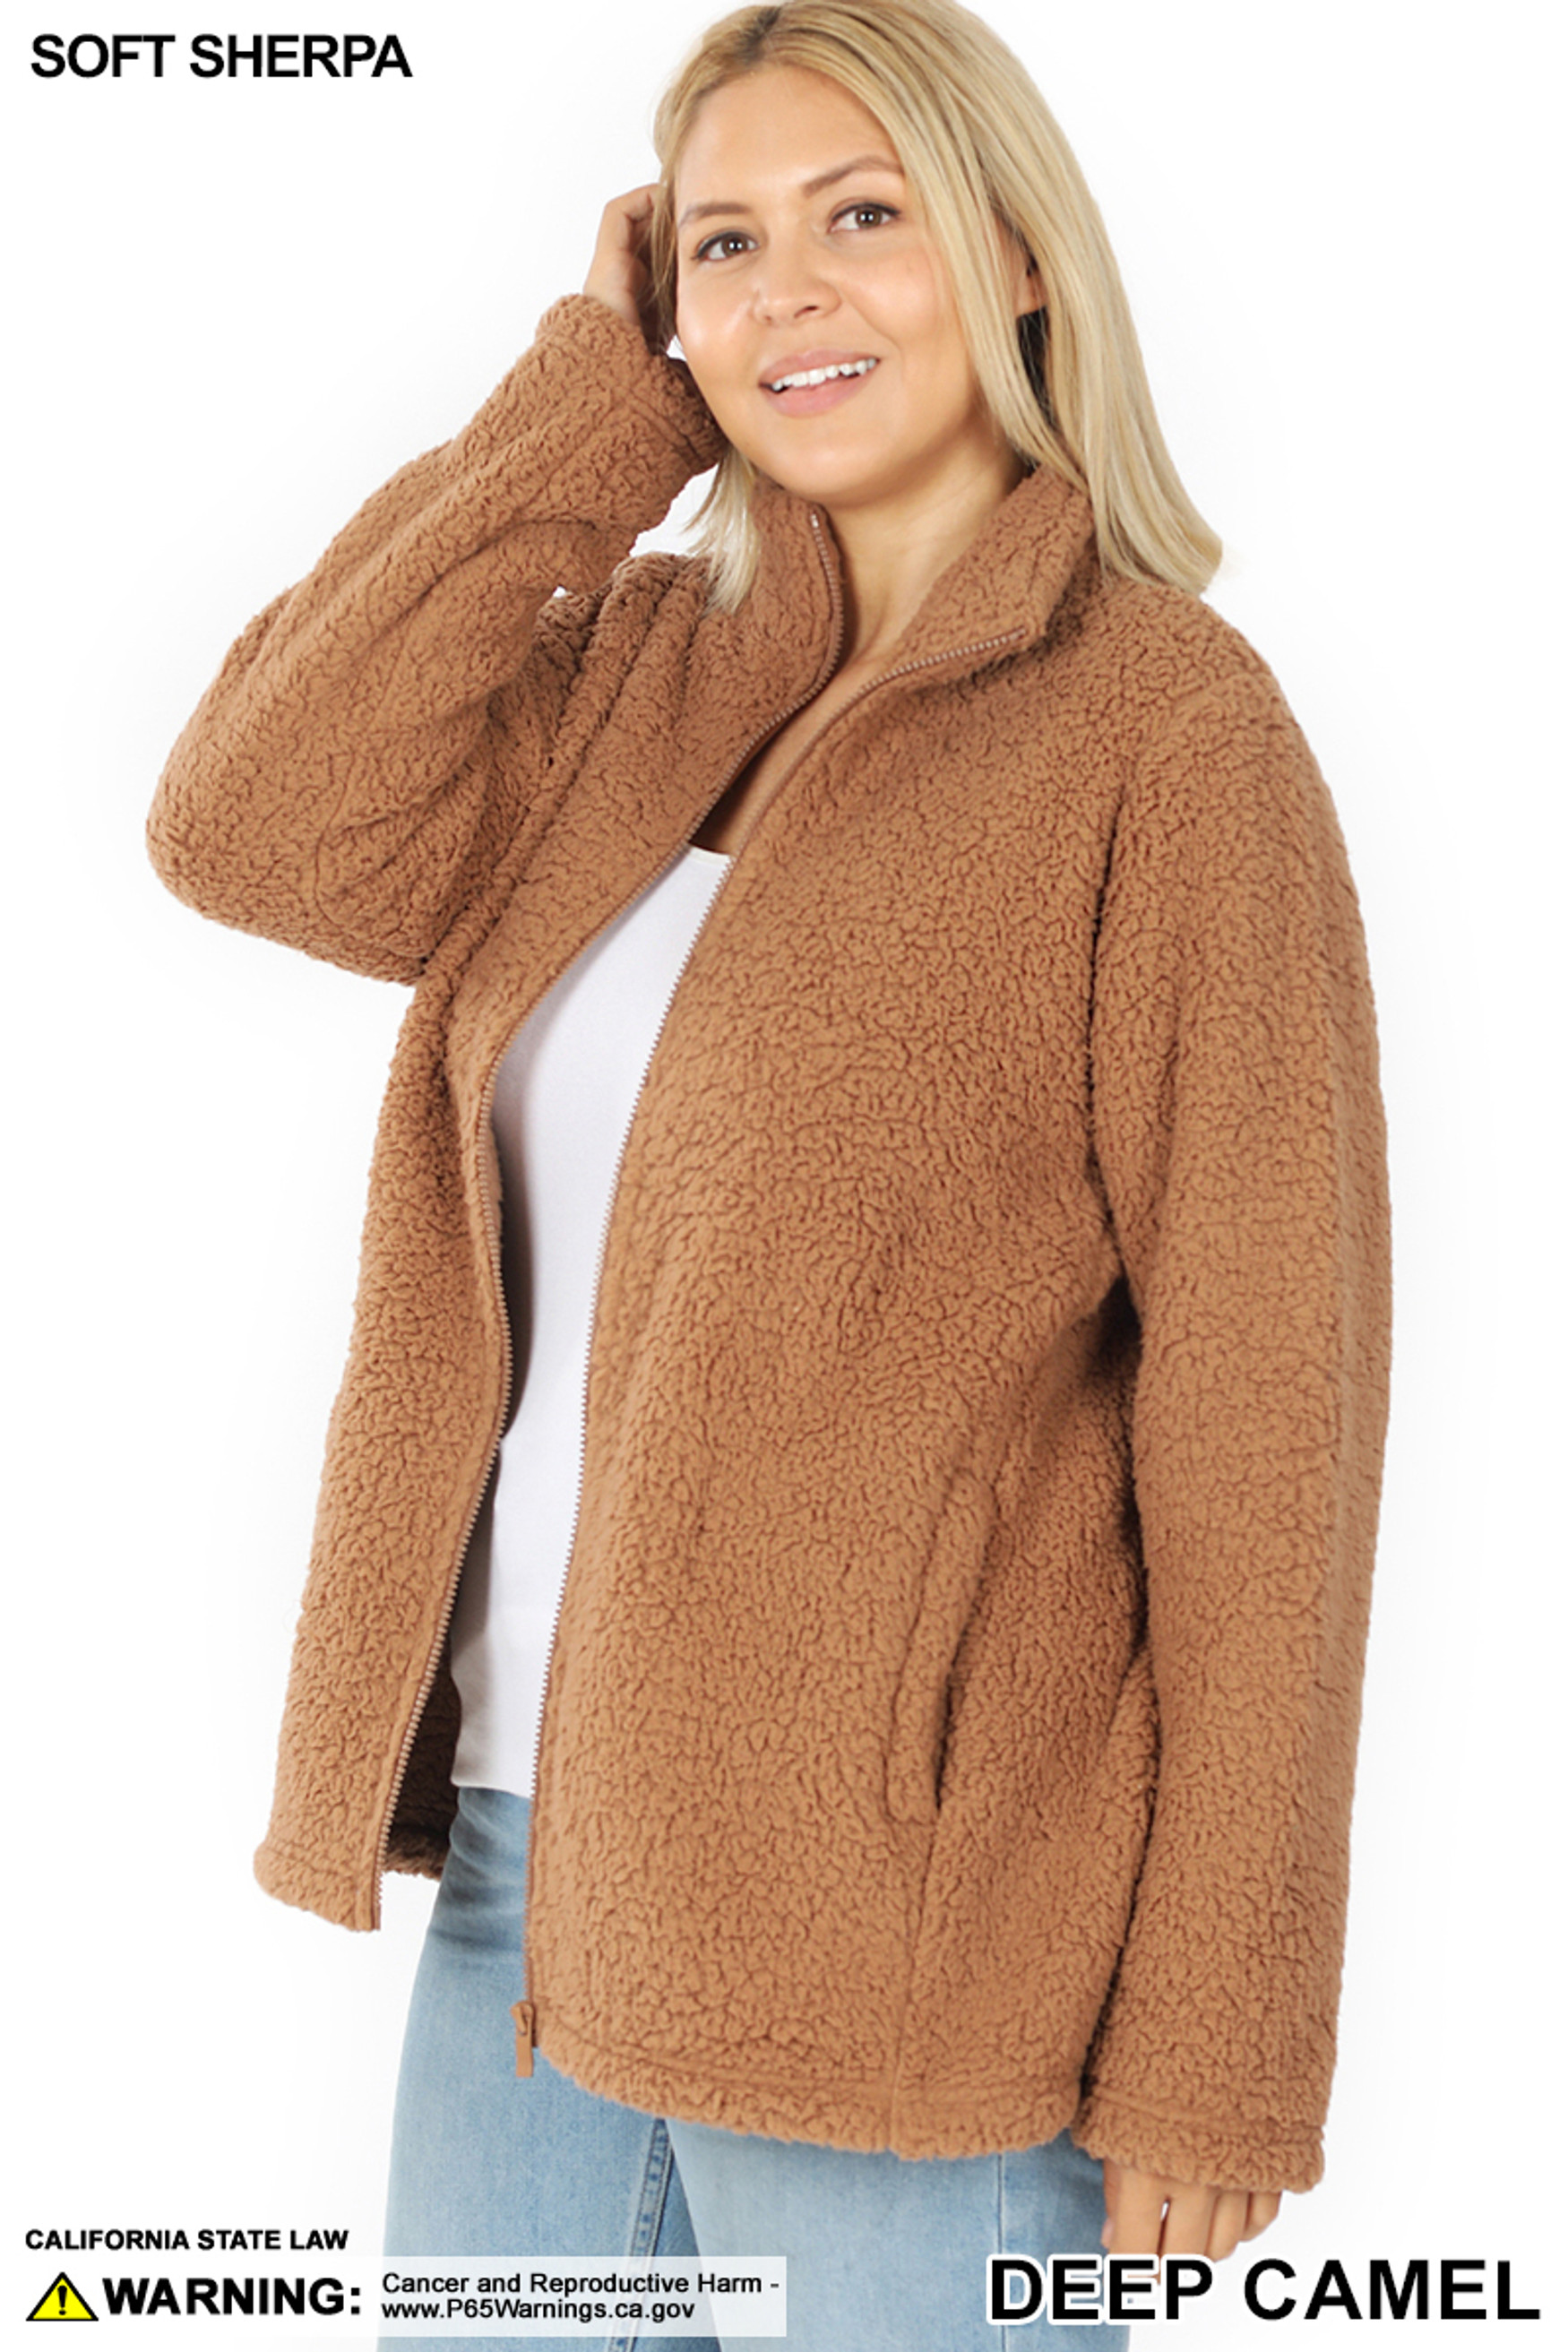 45 degree unzipped image of Deep Camel Sherpa Zip Up Plus Size Jacket with Side Pockets